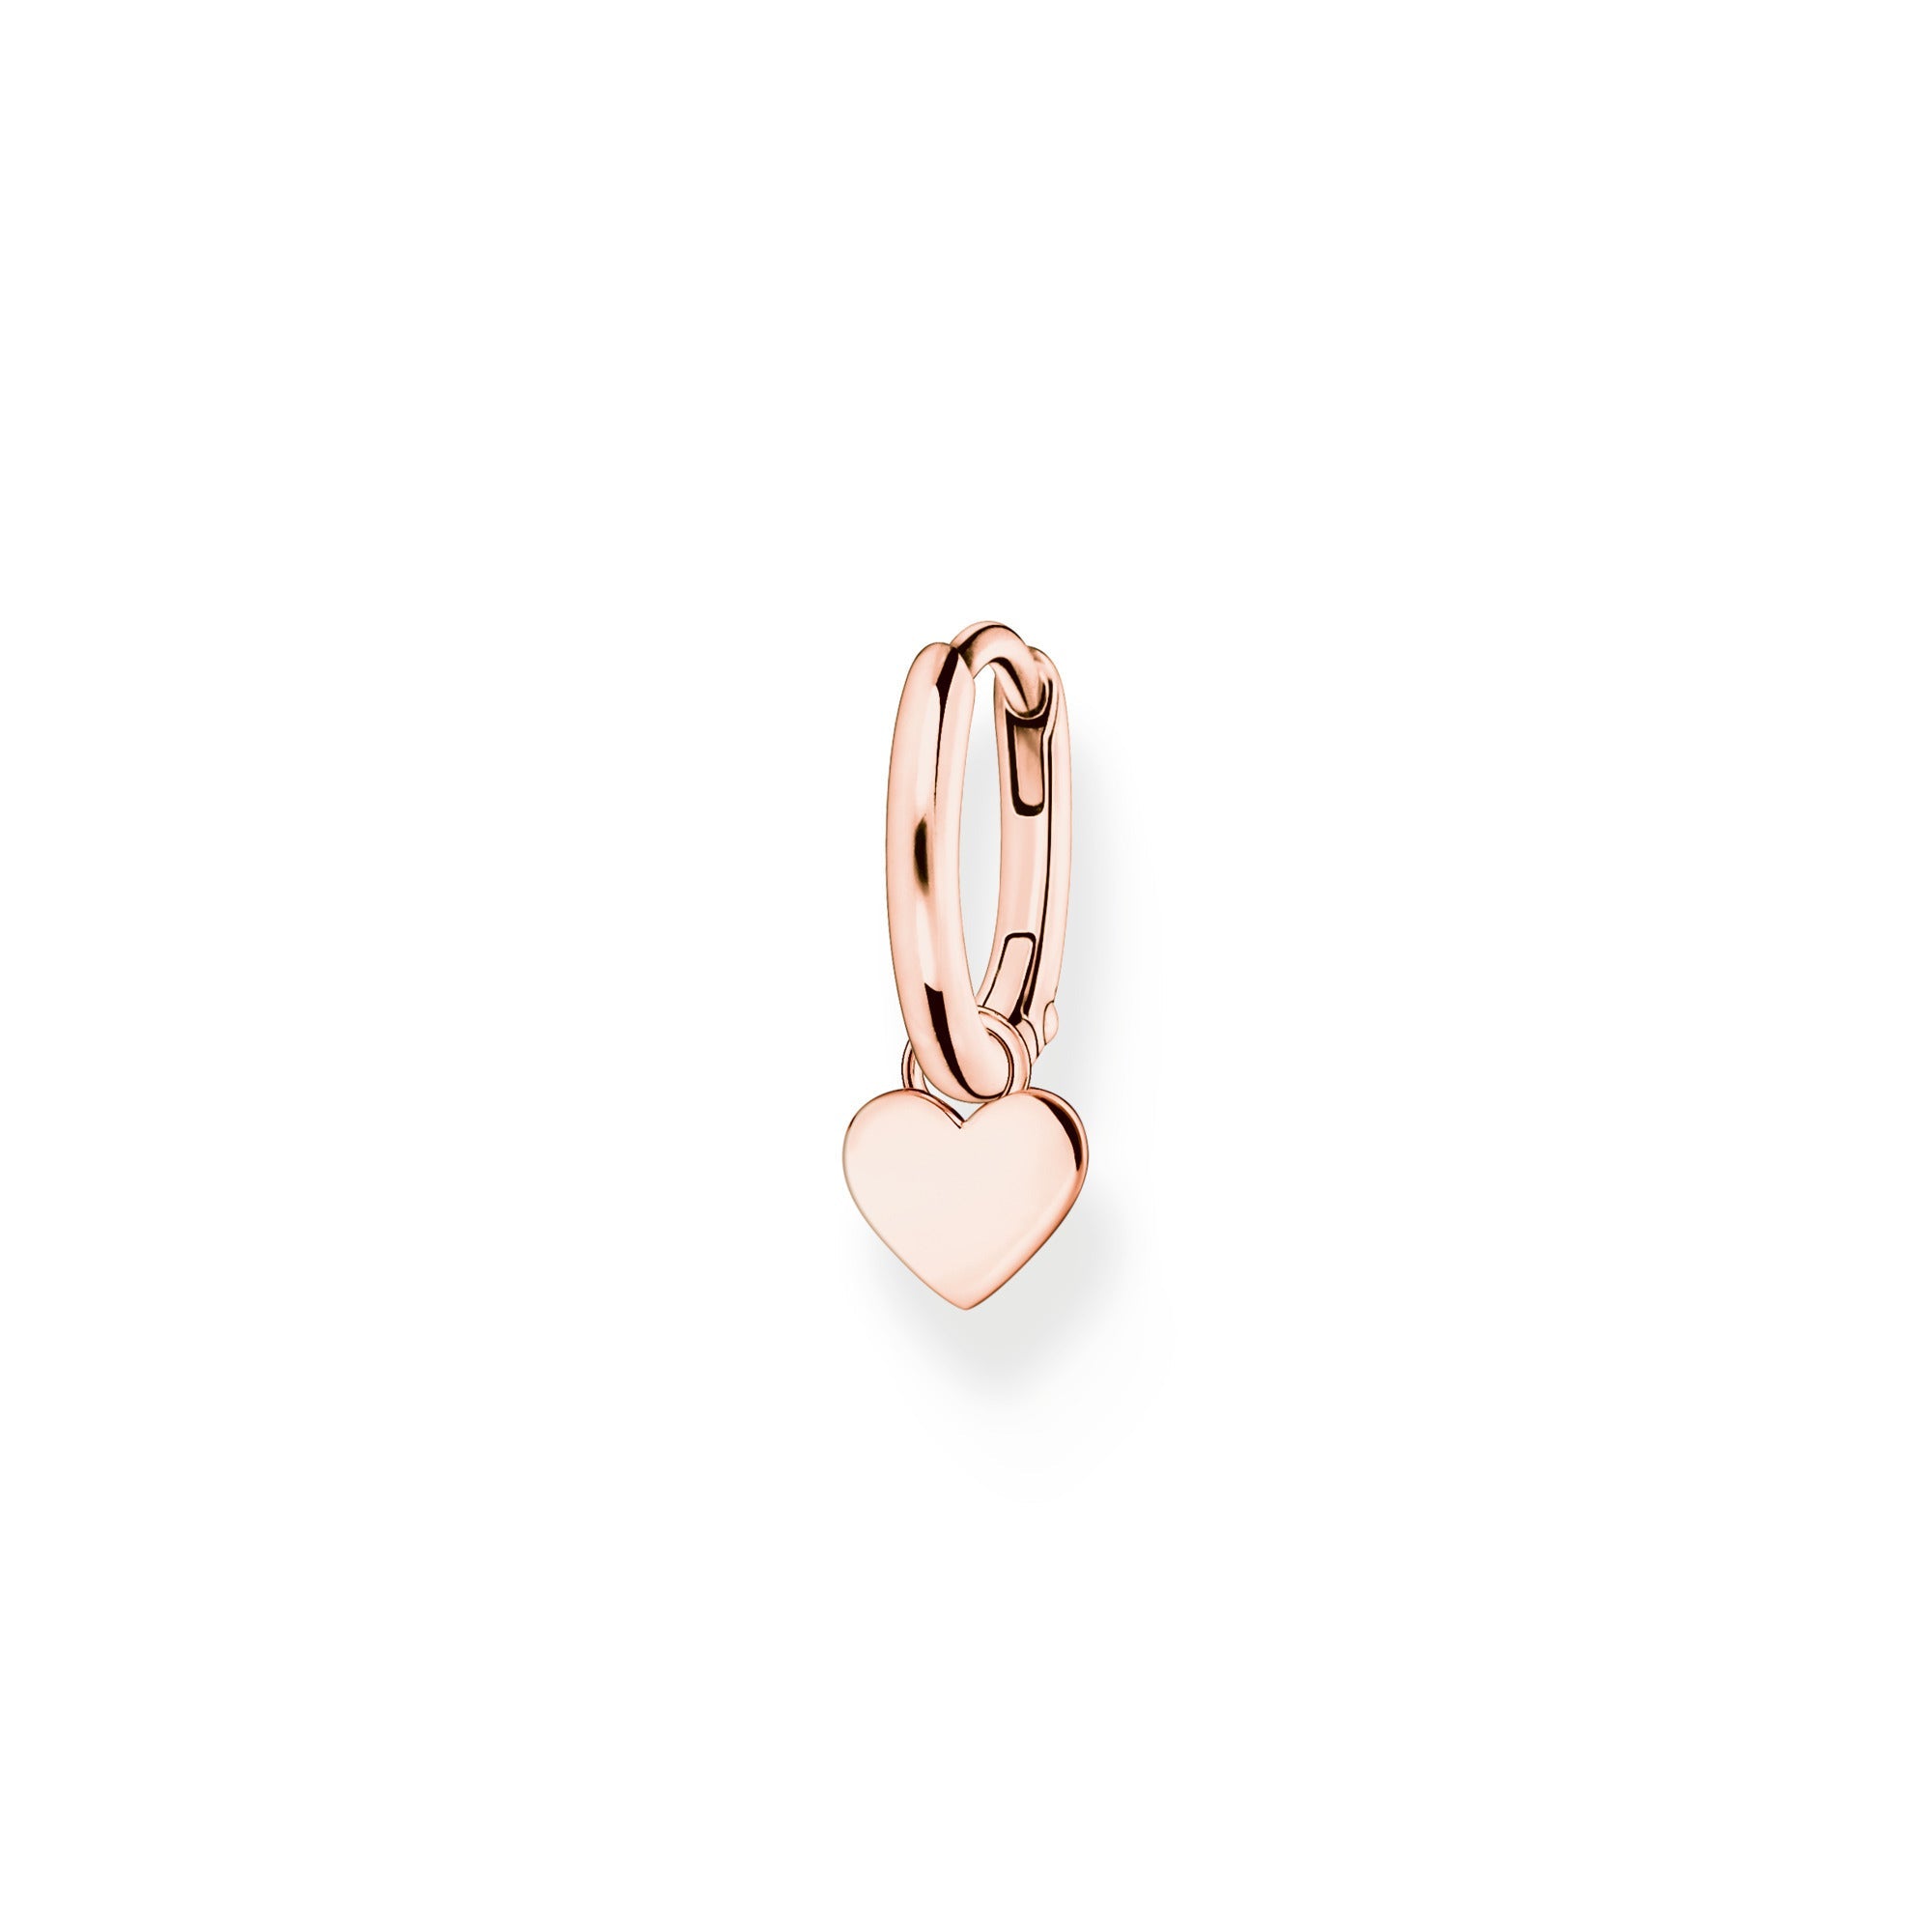 Thomas Sabo Charm Club Rose Gold Plated Sterling Silver Heart Hoop Earring